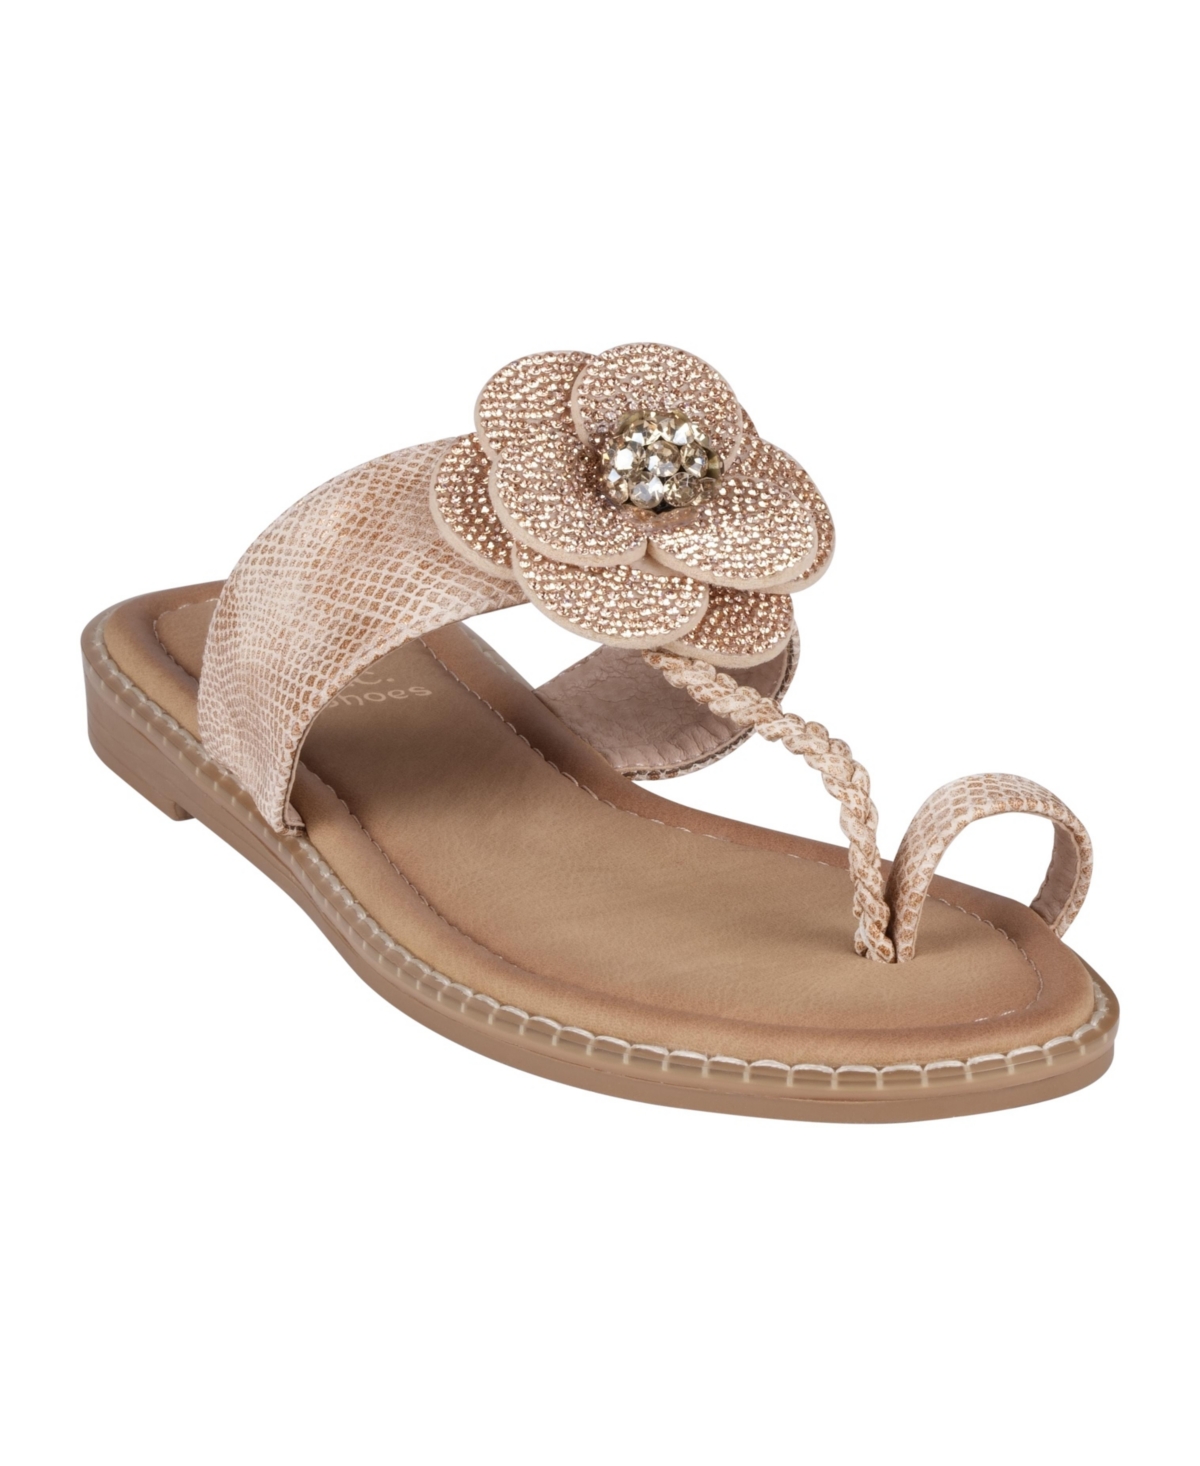 Gc Shoes Women's Blossom Flower Embellished Toe Ring Flat Sandals In Rose Gold